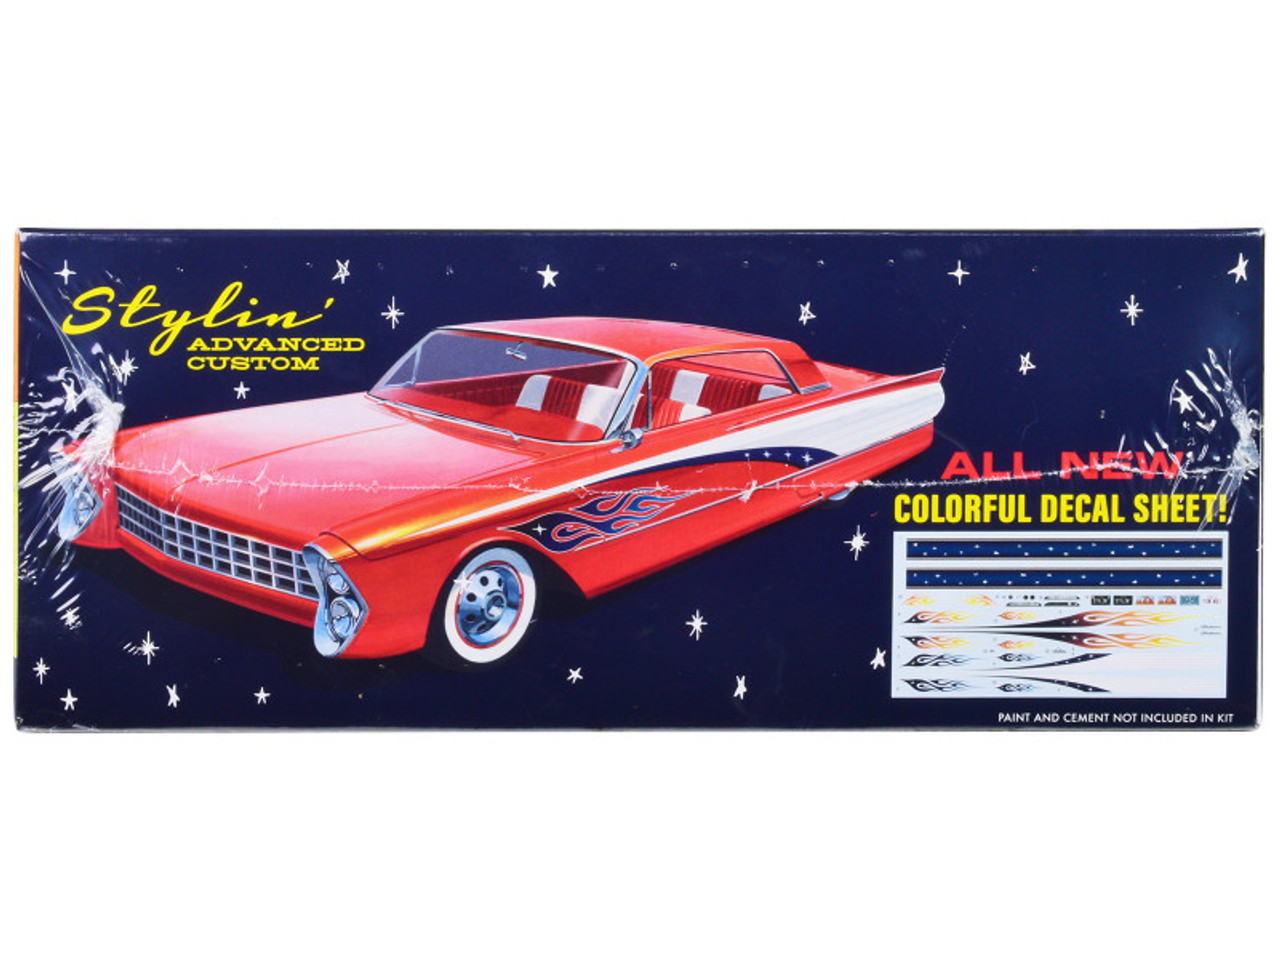 Skill 2 Model Kit 1961 Ford Galaxie Hardtop 3-in-1 Kit 1/25 Scale Model by AMT